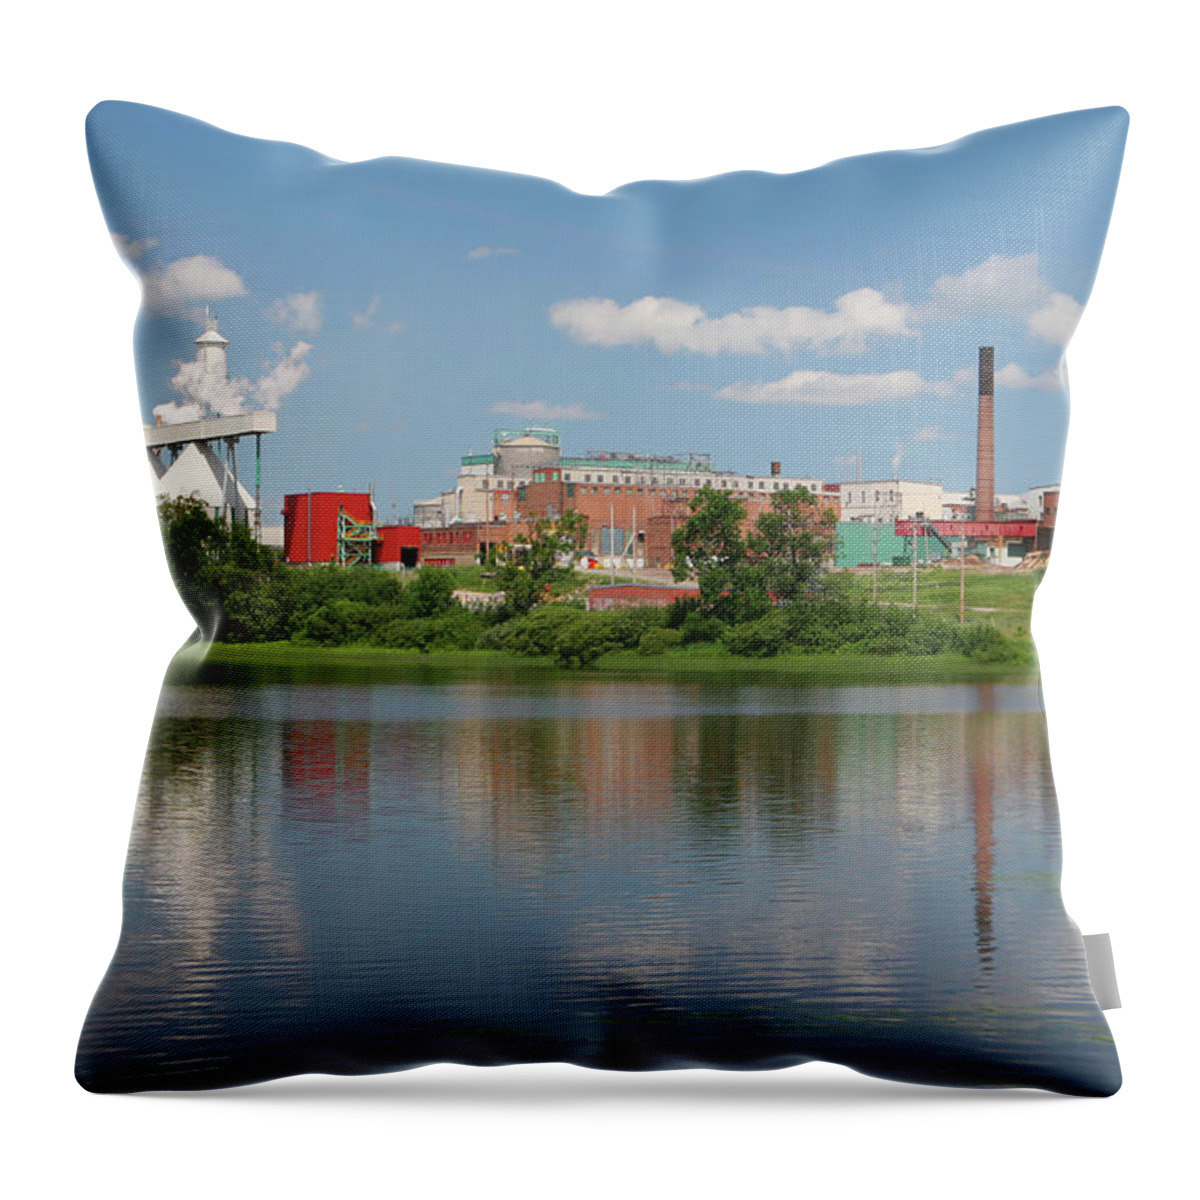 Problems Throw Pillow featuring the photograph Large Pulp And Paper Industry by Buzbuzzer